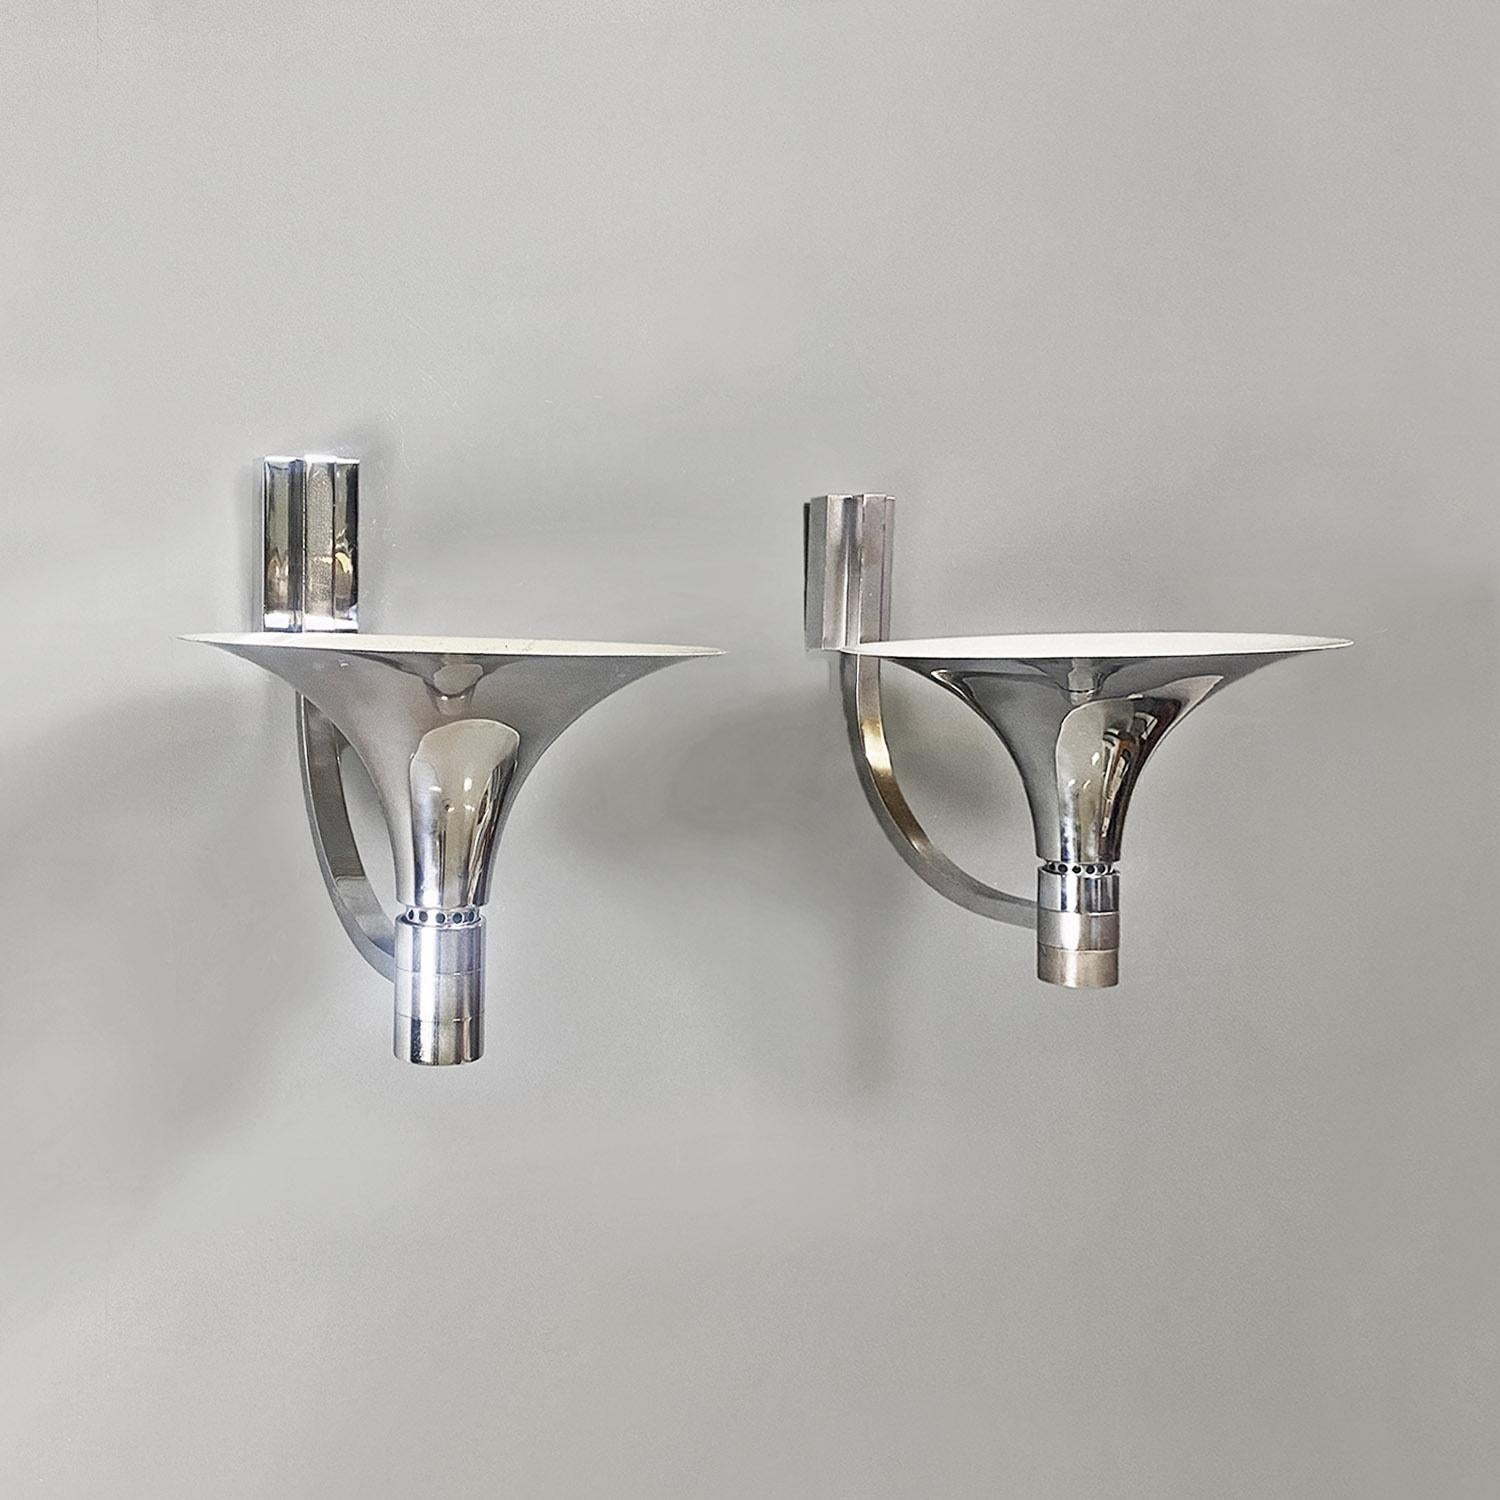 Late 20th Century AM/AS Italian wall lamp by Franco Albini and Franca Helg for SIrrah, 1969 For Sale